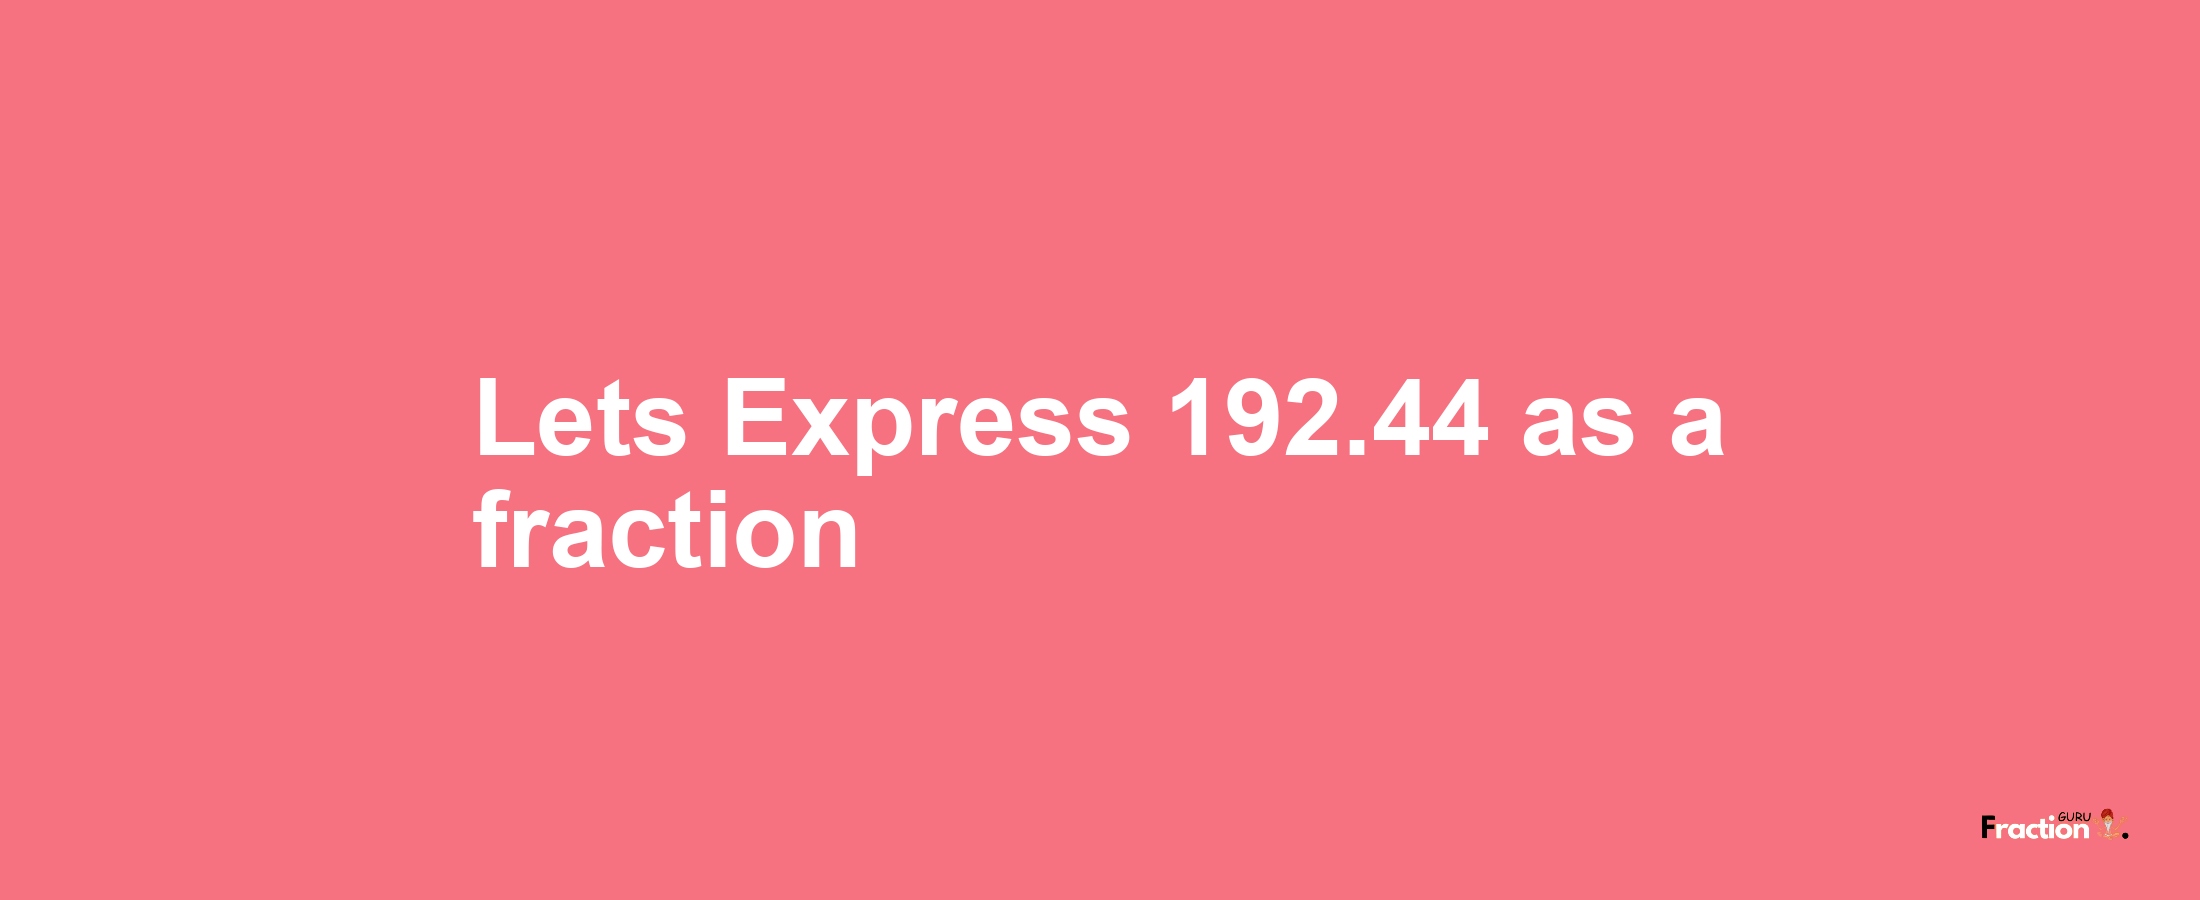 Lets Express 192.44 as afraction